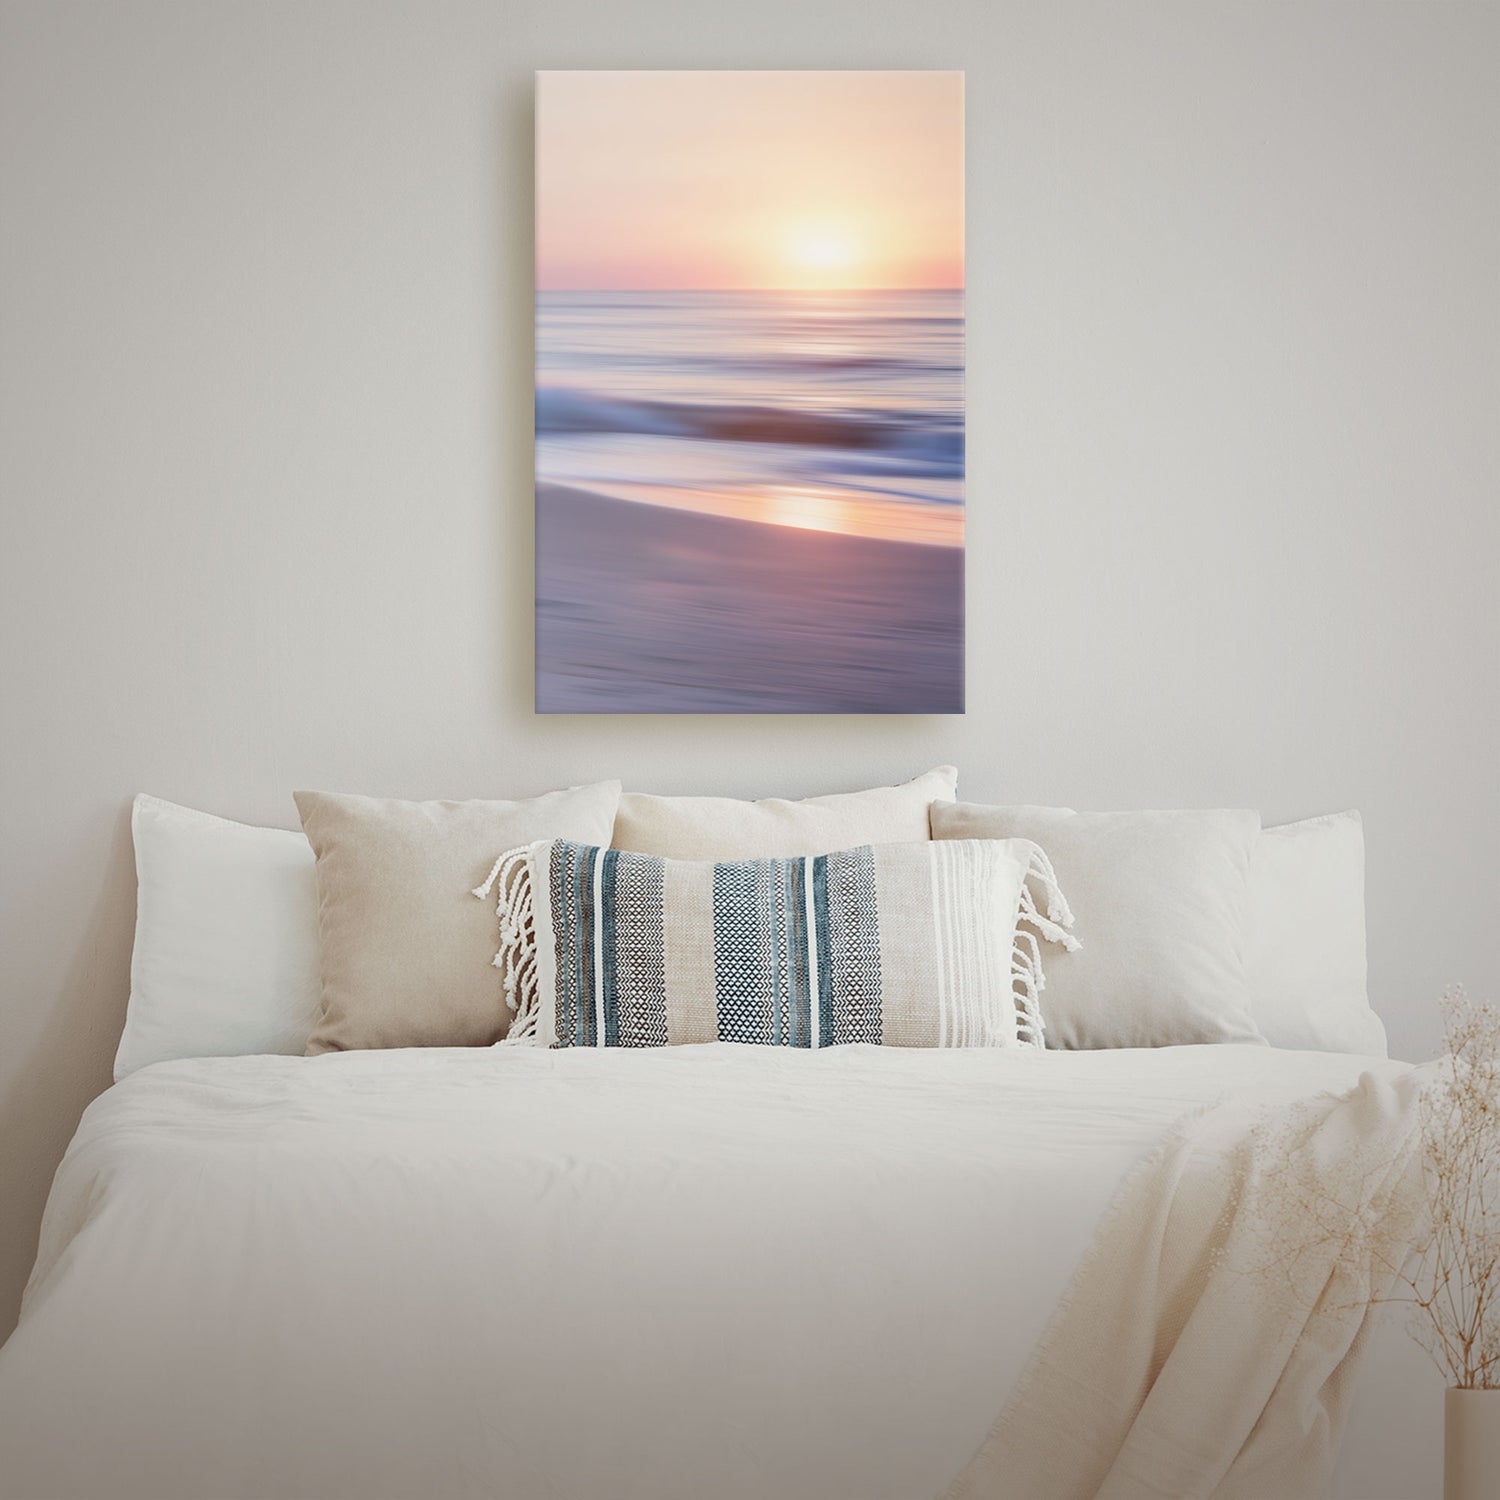 Outer Banks captured in Ocean Sunrise on canvas, an artful representation of serenity with soft, muted colors.